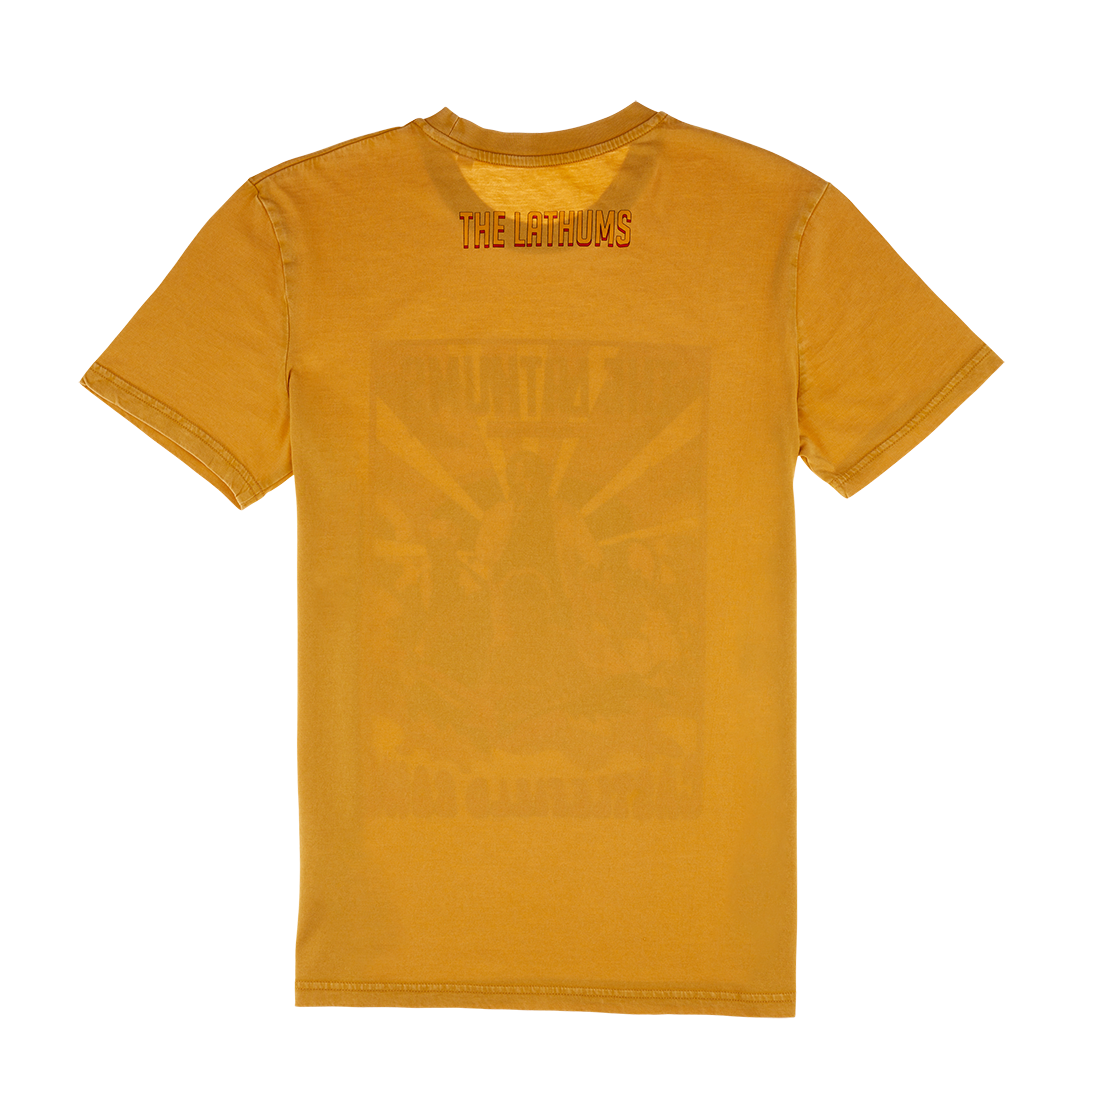 The Lathums - Castlefield Bowl: Limited Edition Tee